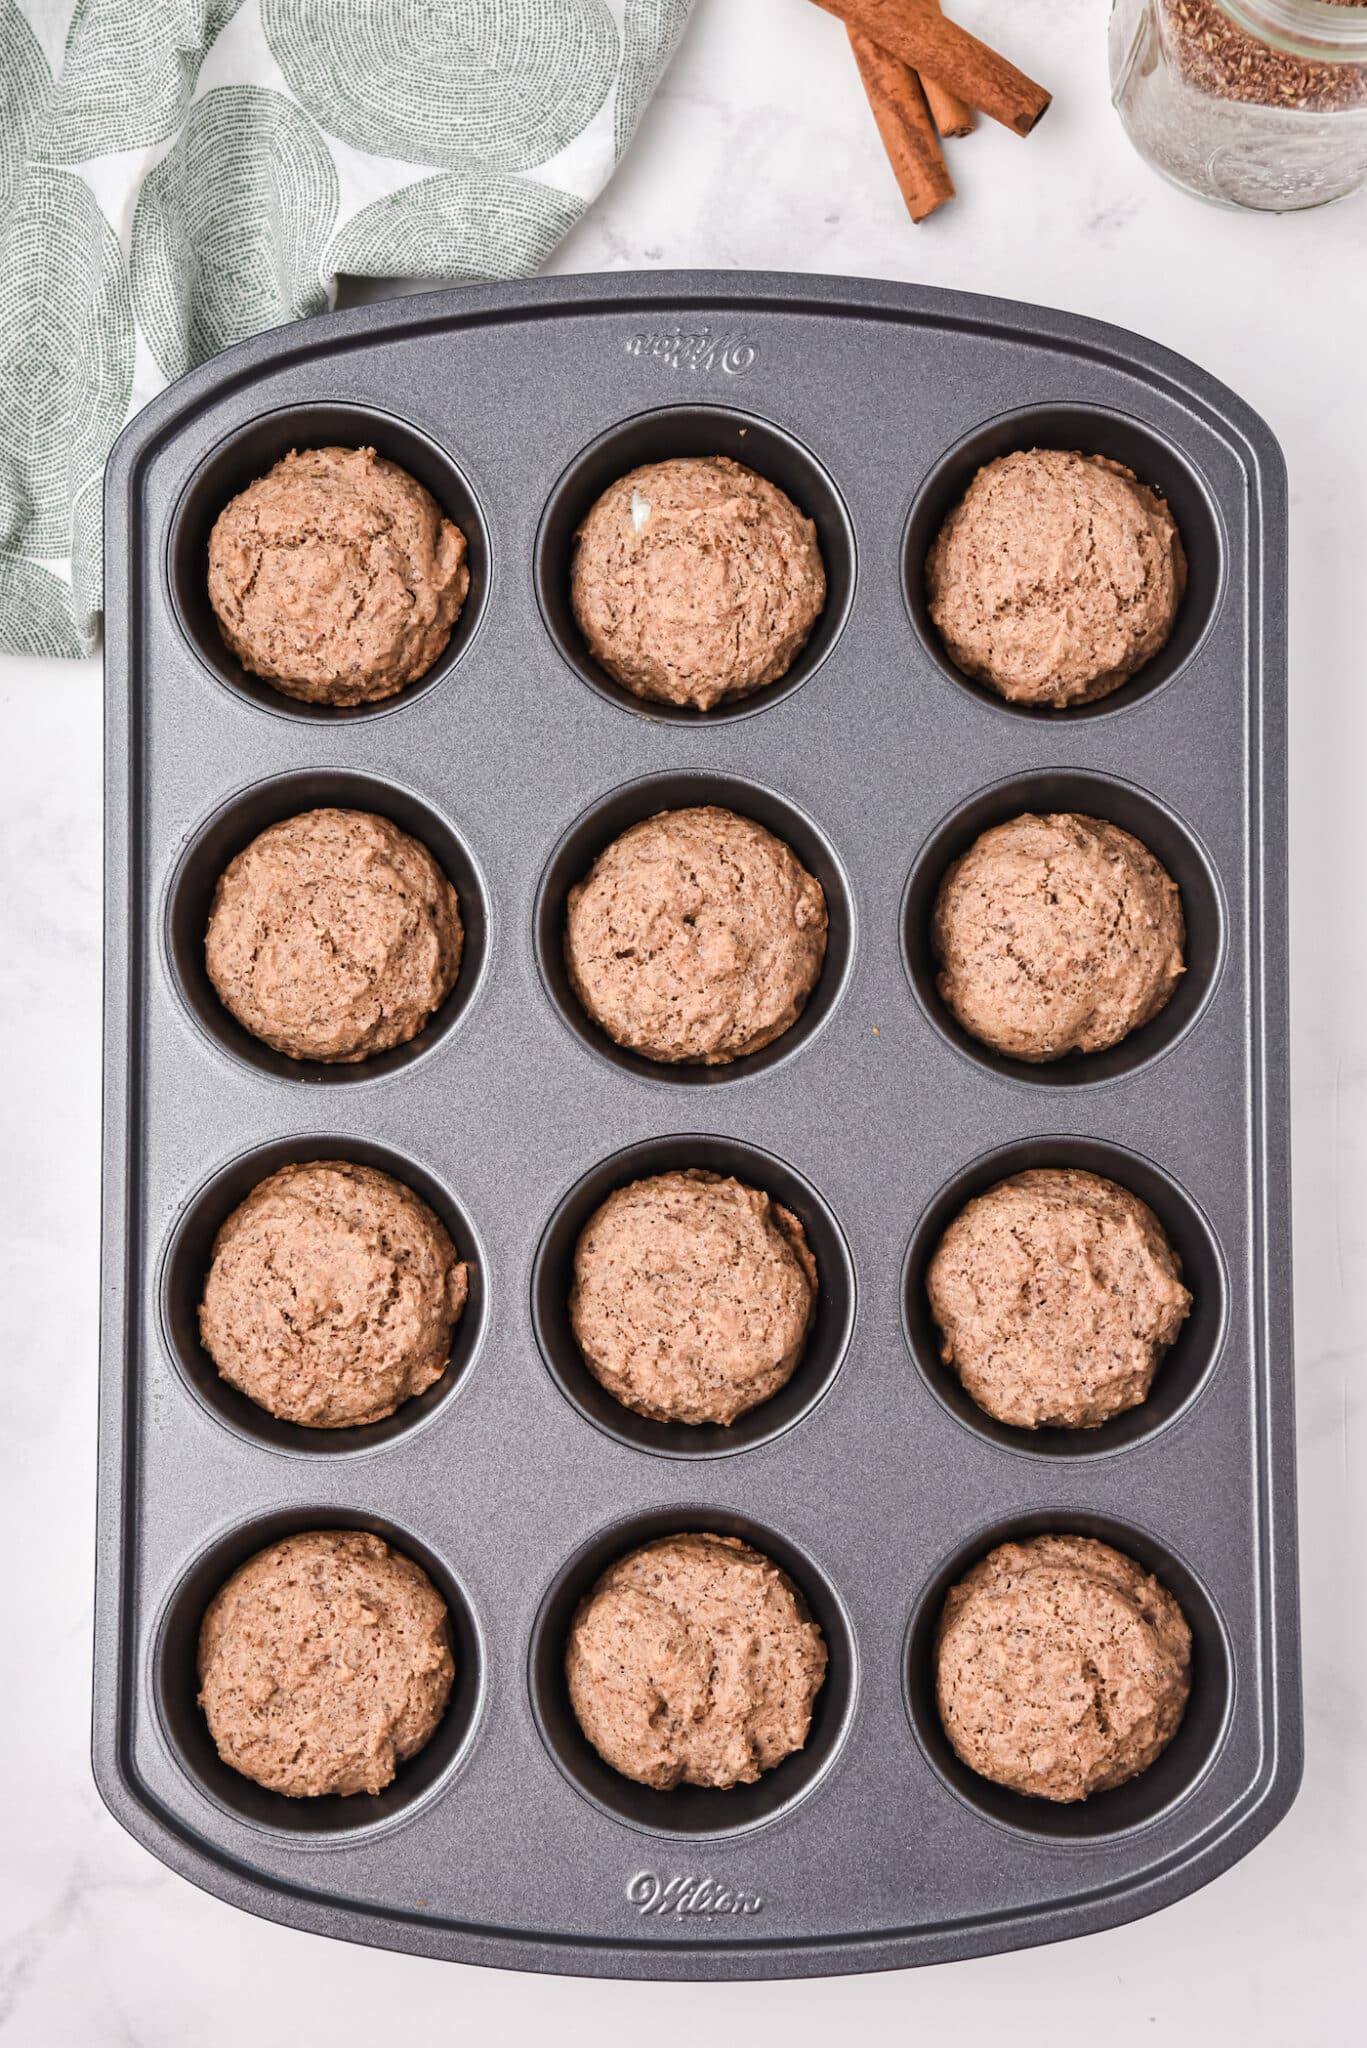 Muffin tray filled with baked flax muffins.